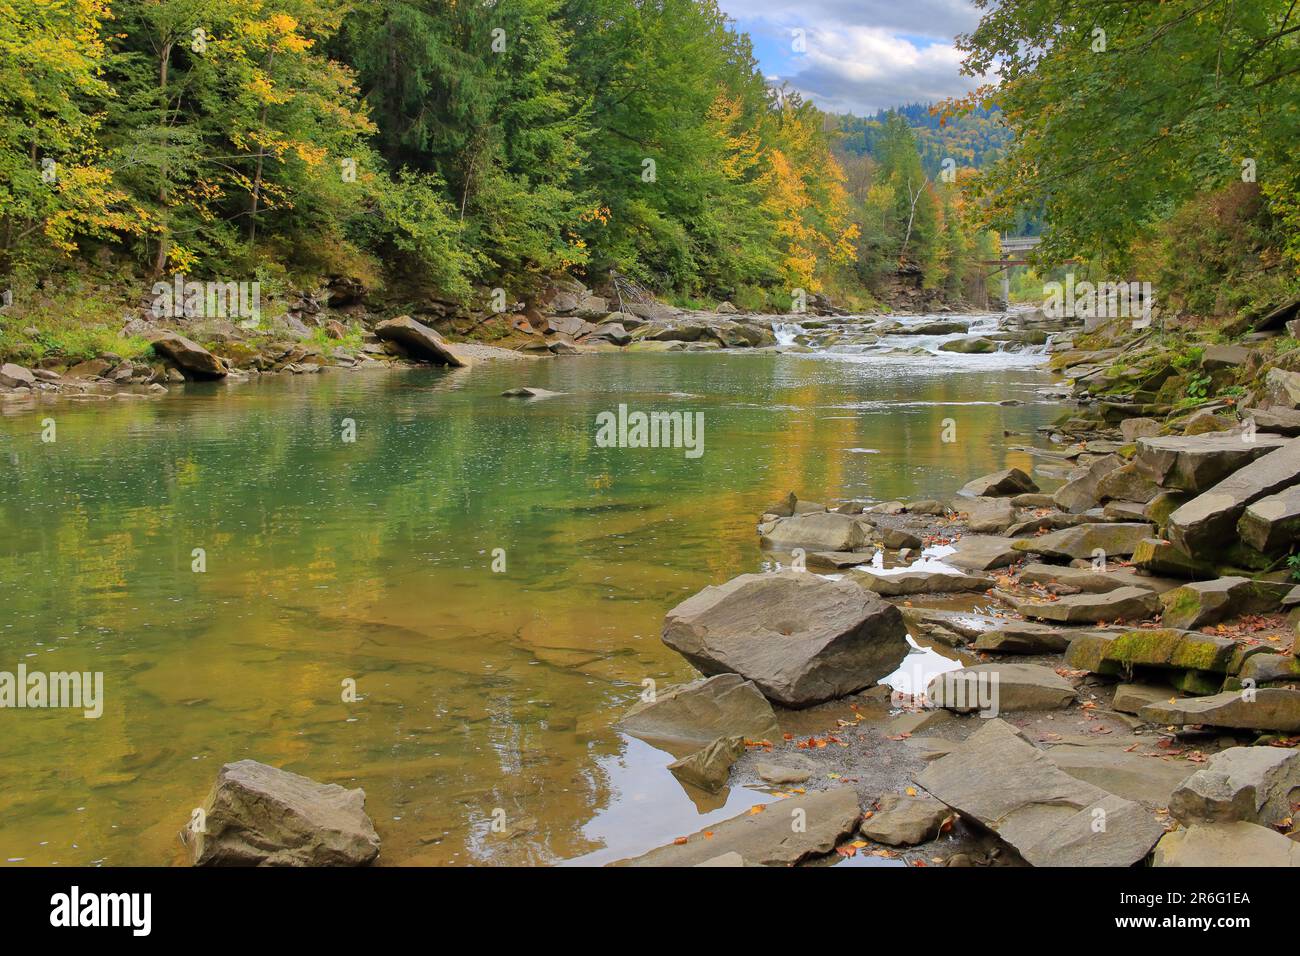 The photo was taken in the Ukrainian city of Yaremche. The photo shows an autumn landscape of the river called the Prut, in a mountainous wooded area. Stock Photo